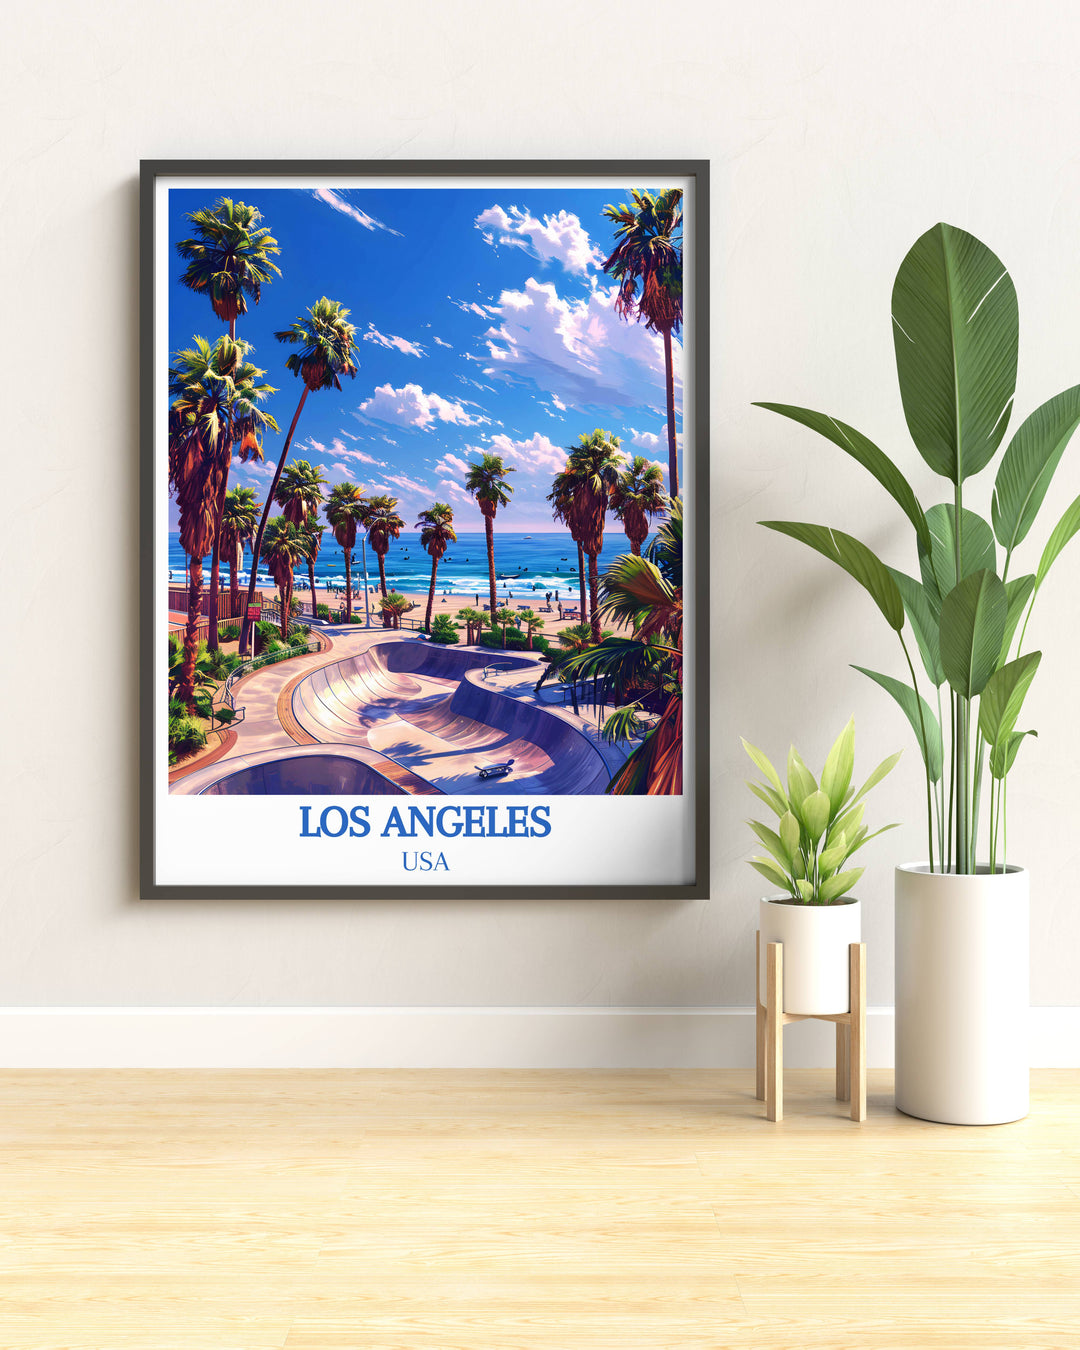 Custom print of Venice Beach, tailored to bring Californias sunny ambience to your living space.